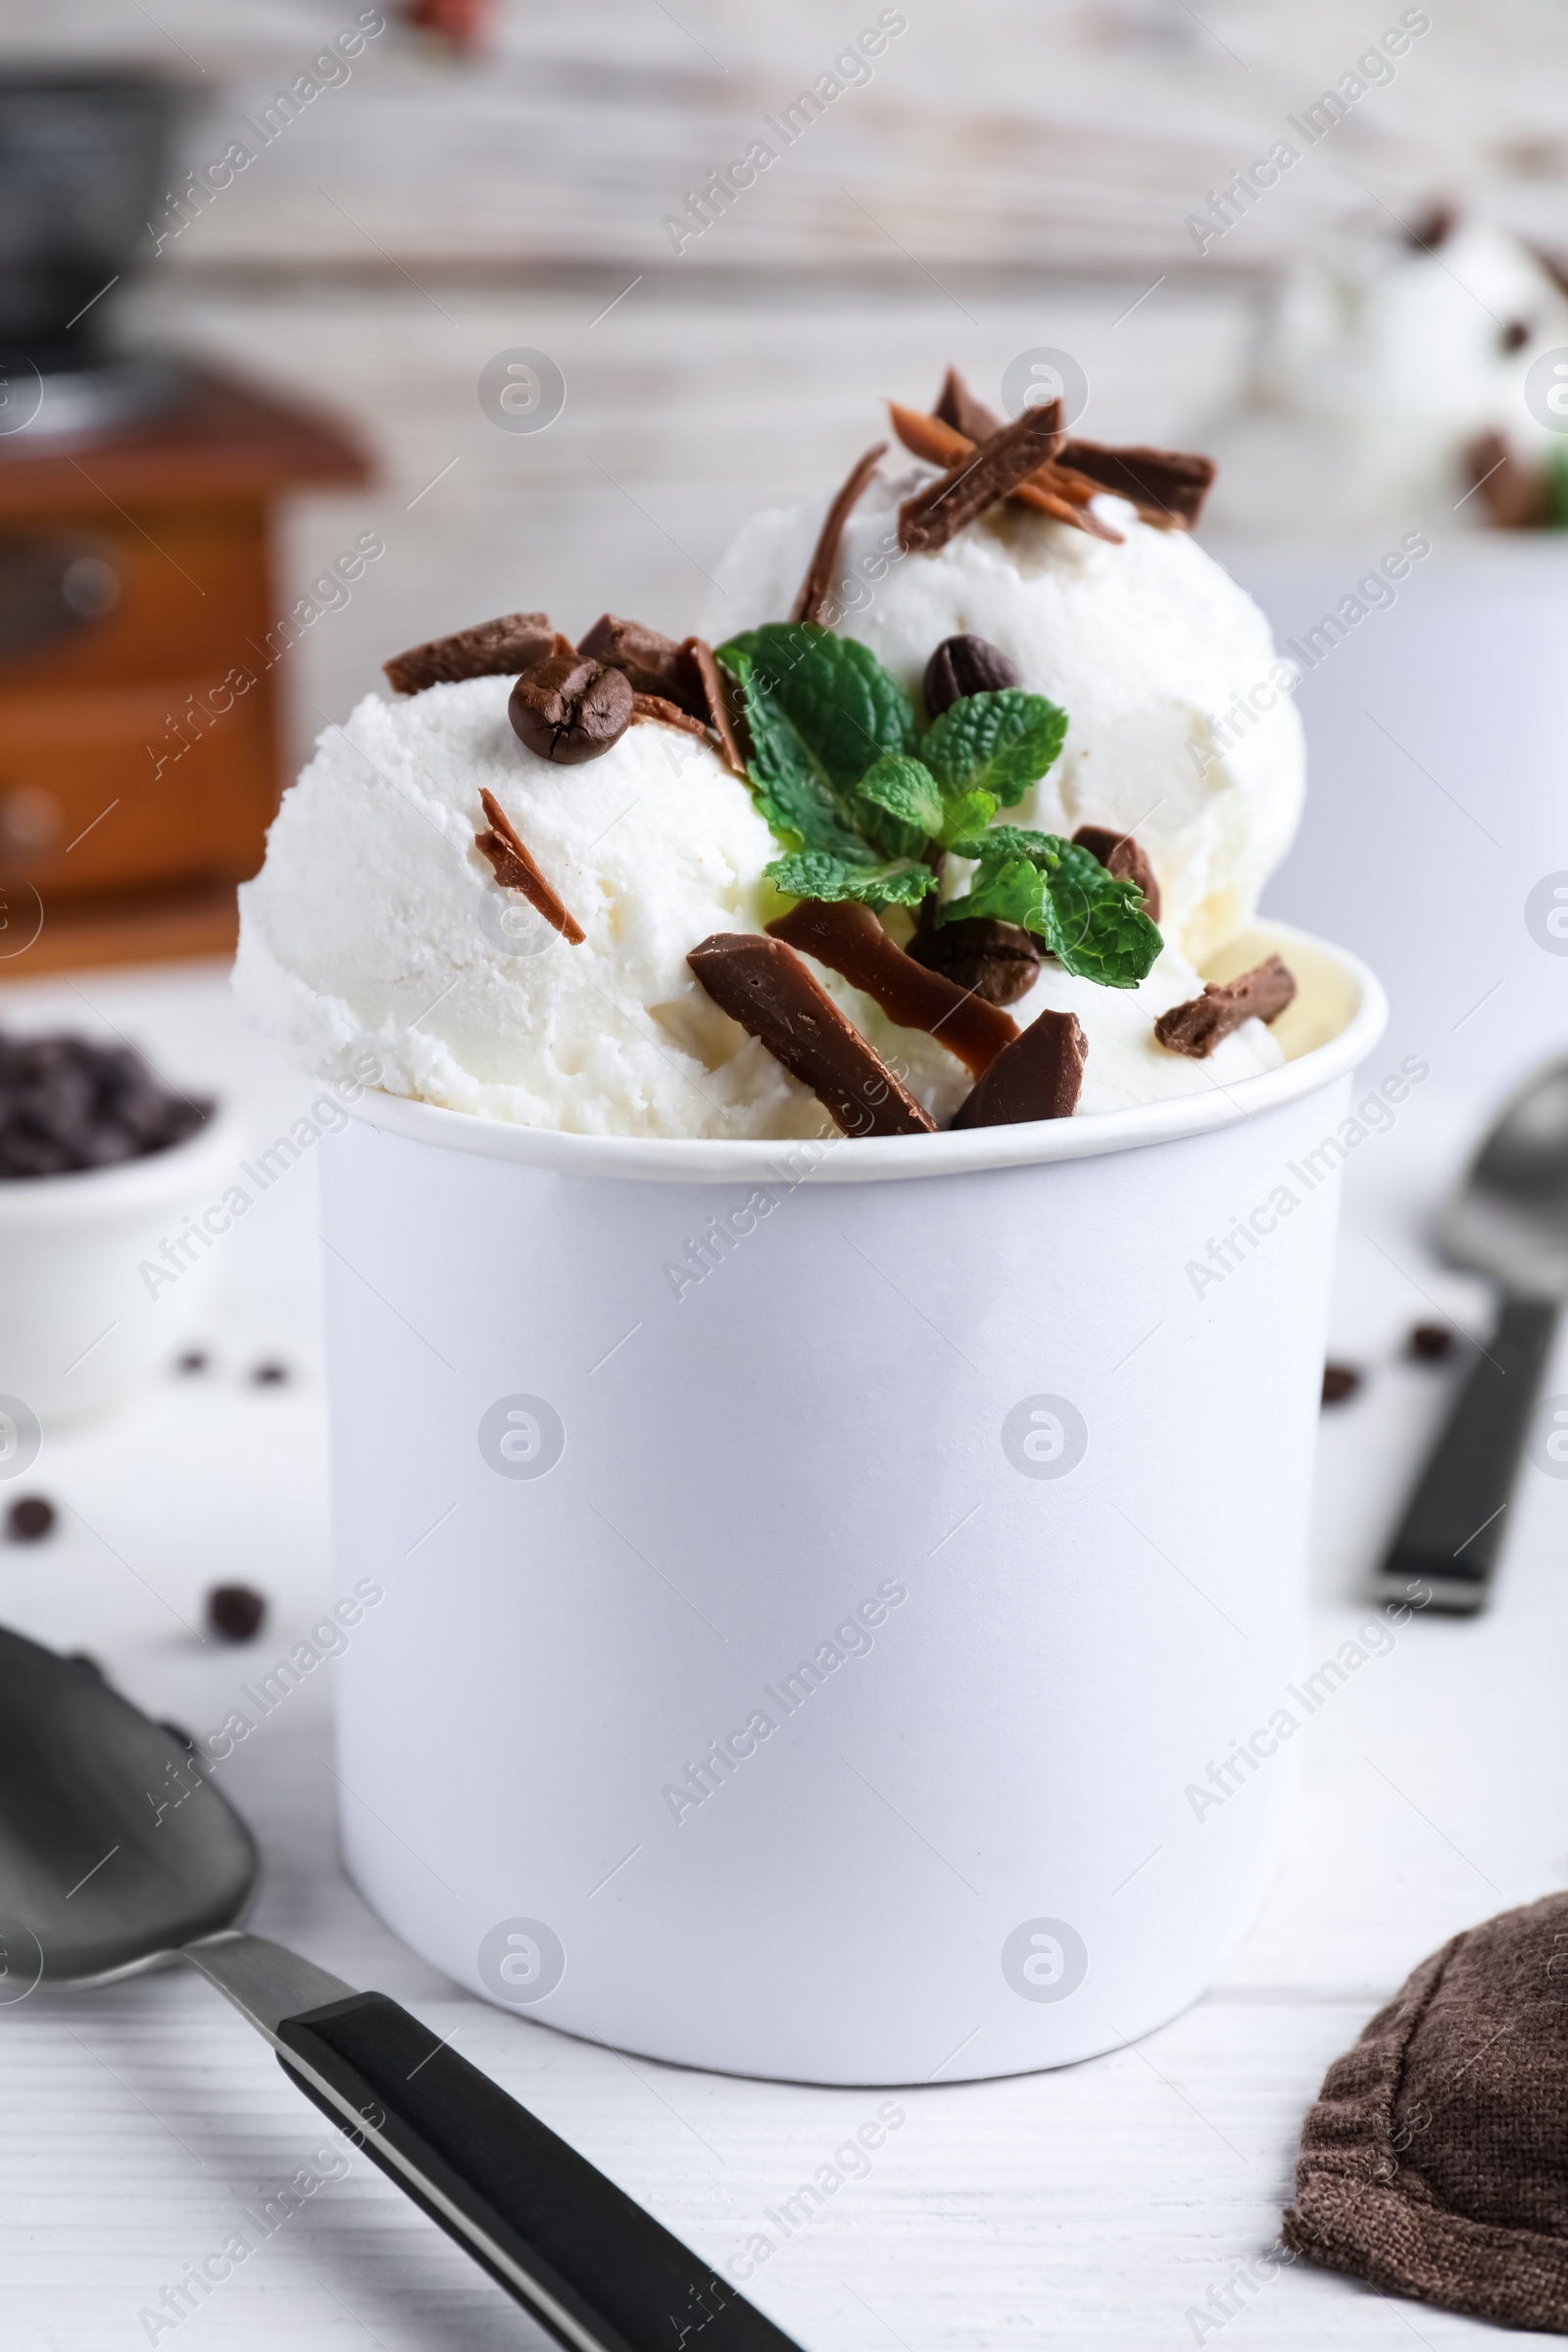 Photo of Yummy ice cream with chocolate served on white table